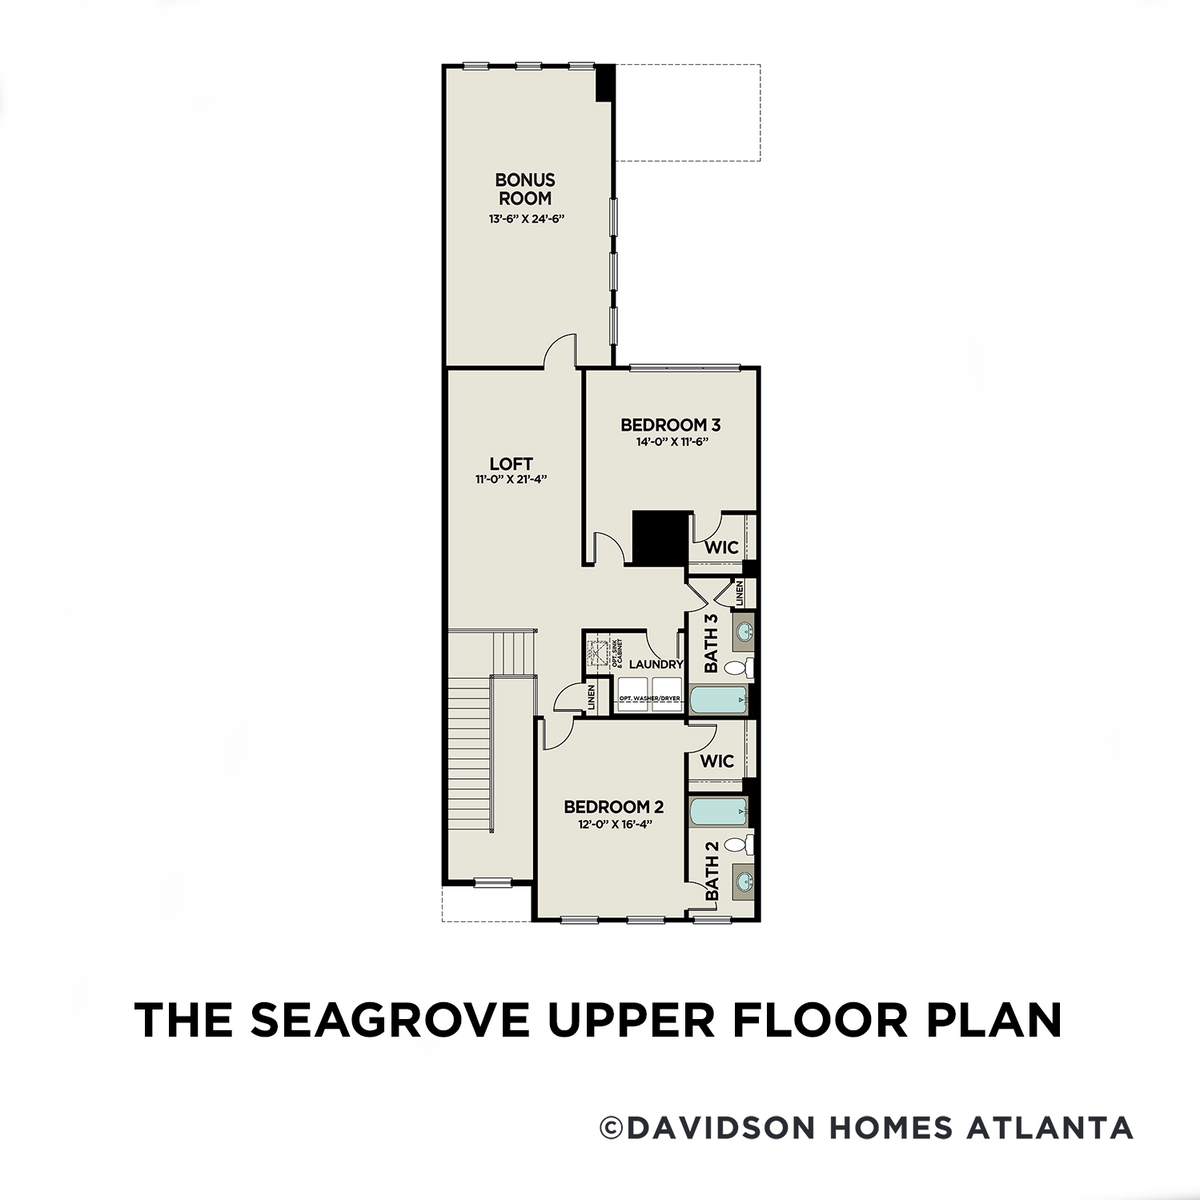 2 - The Seagrove B floor plan layout for 754 Stickley Oak Way in Davidson Homes' The Village at Towne Lake community.